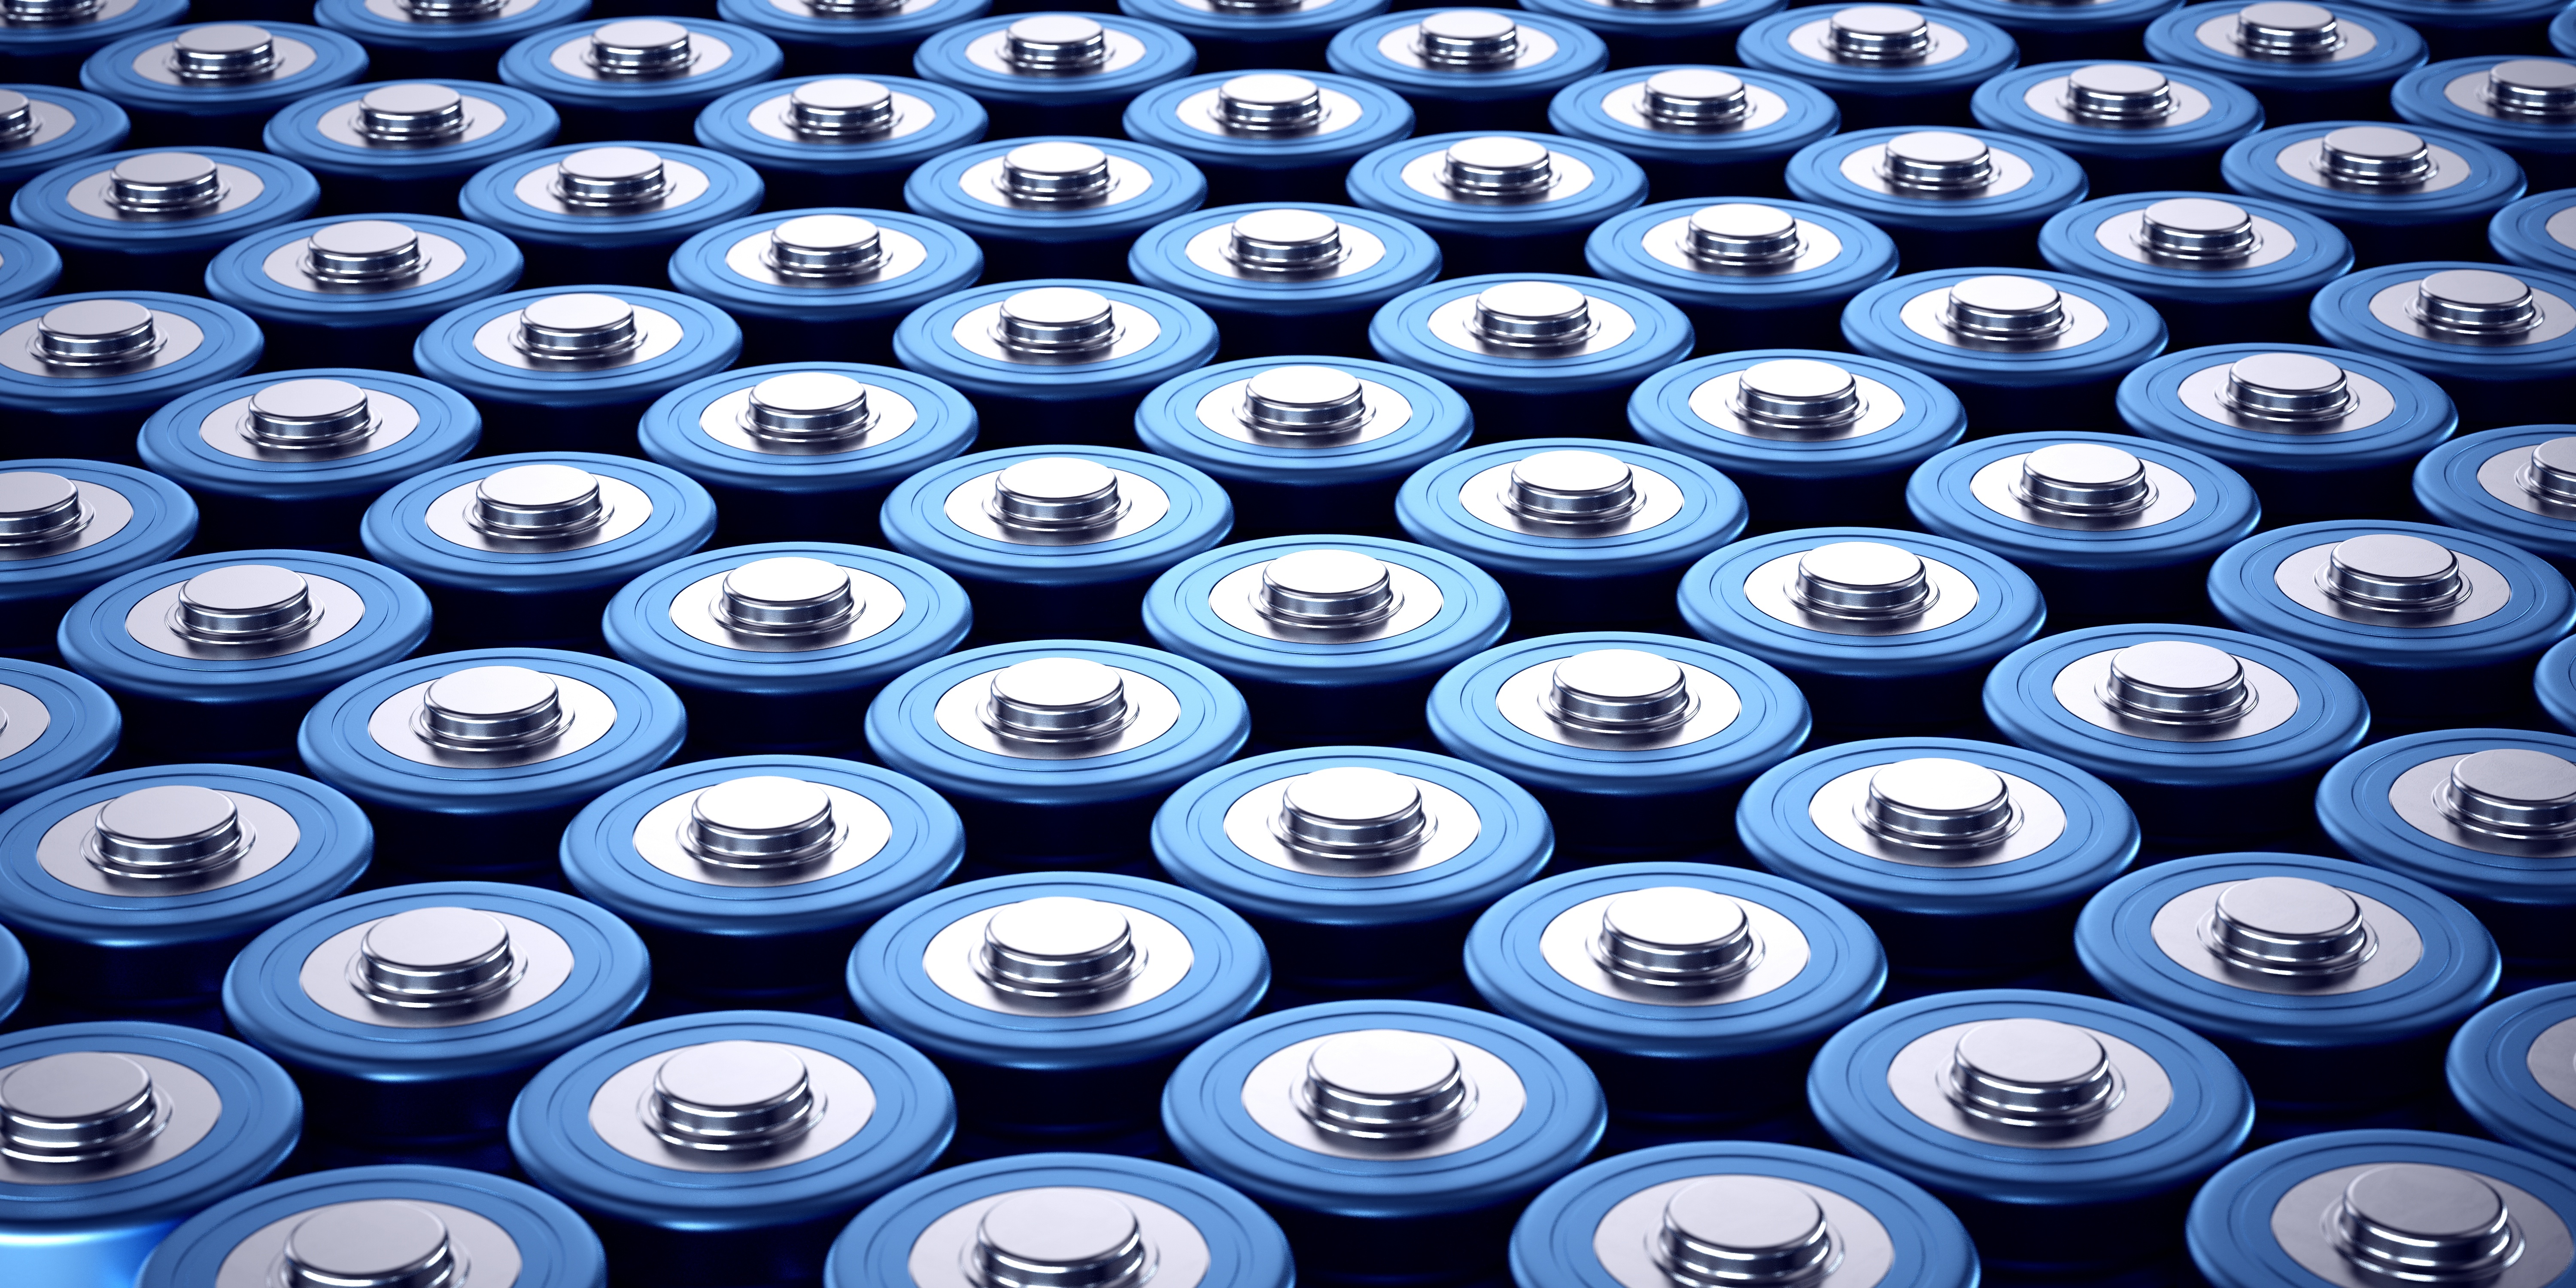 An array of blue batteries clustered together shown from the front and above. (Image: Adobe Stock, edited by MIT ISN)